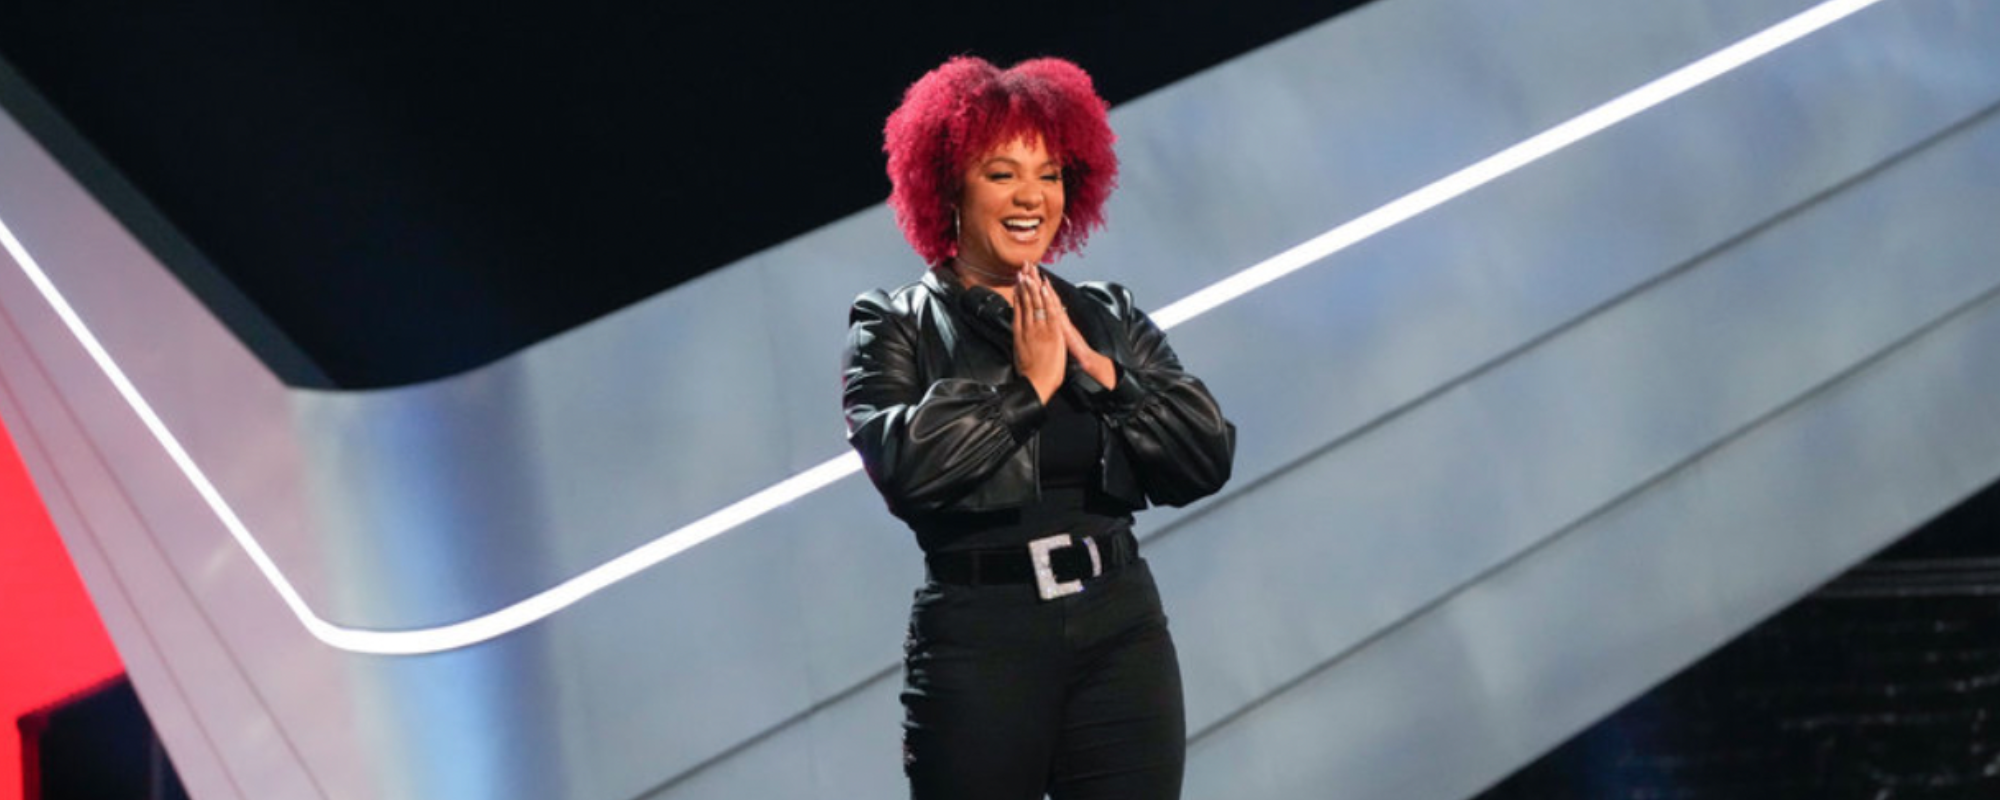 Cait Martin Earns Four Chair Turn on ‘The Voice’ with Harry Styles Cover